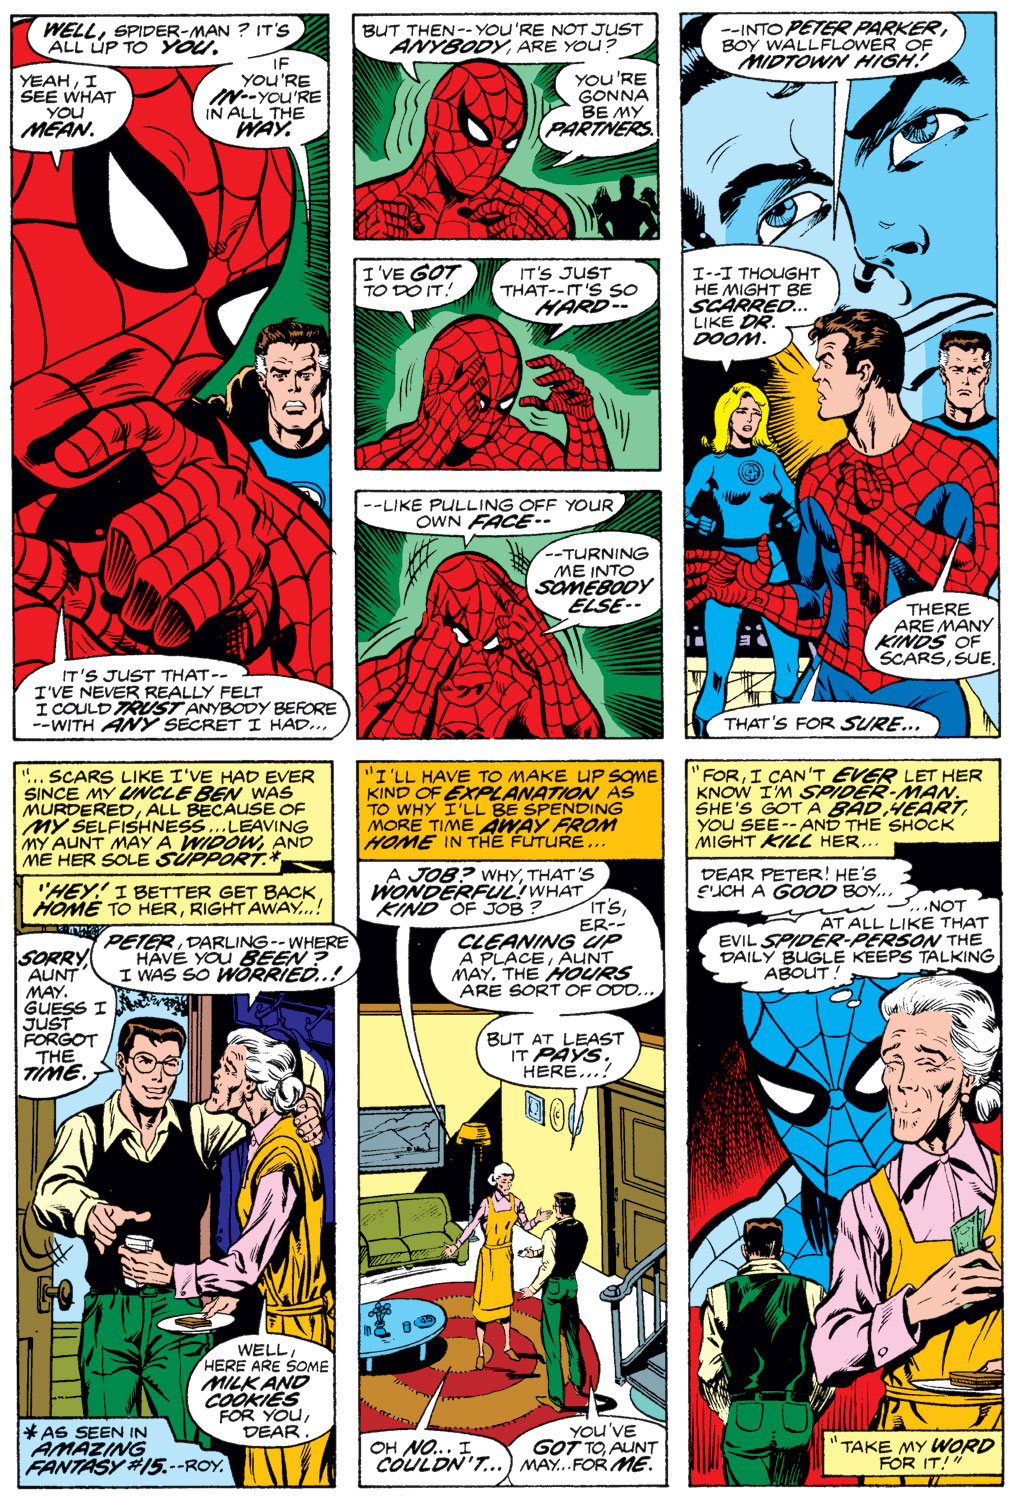 What If? (1977) issue 1 - Spider-Man joined the Fantastic Four - Page 12